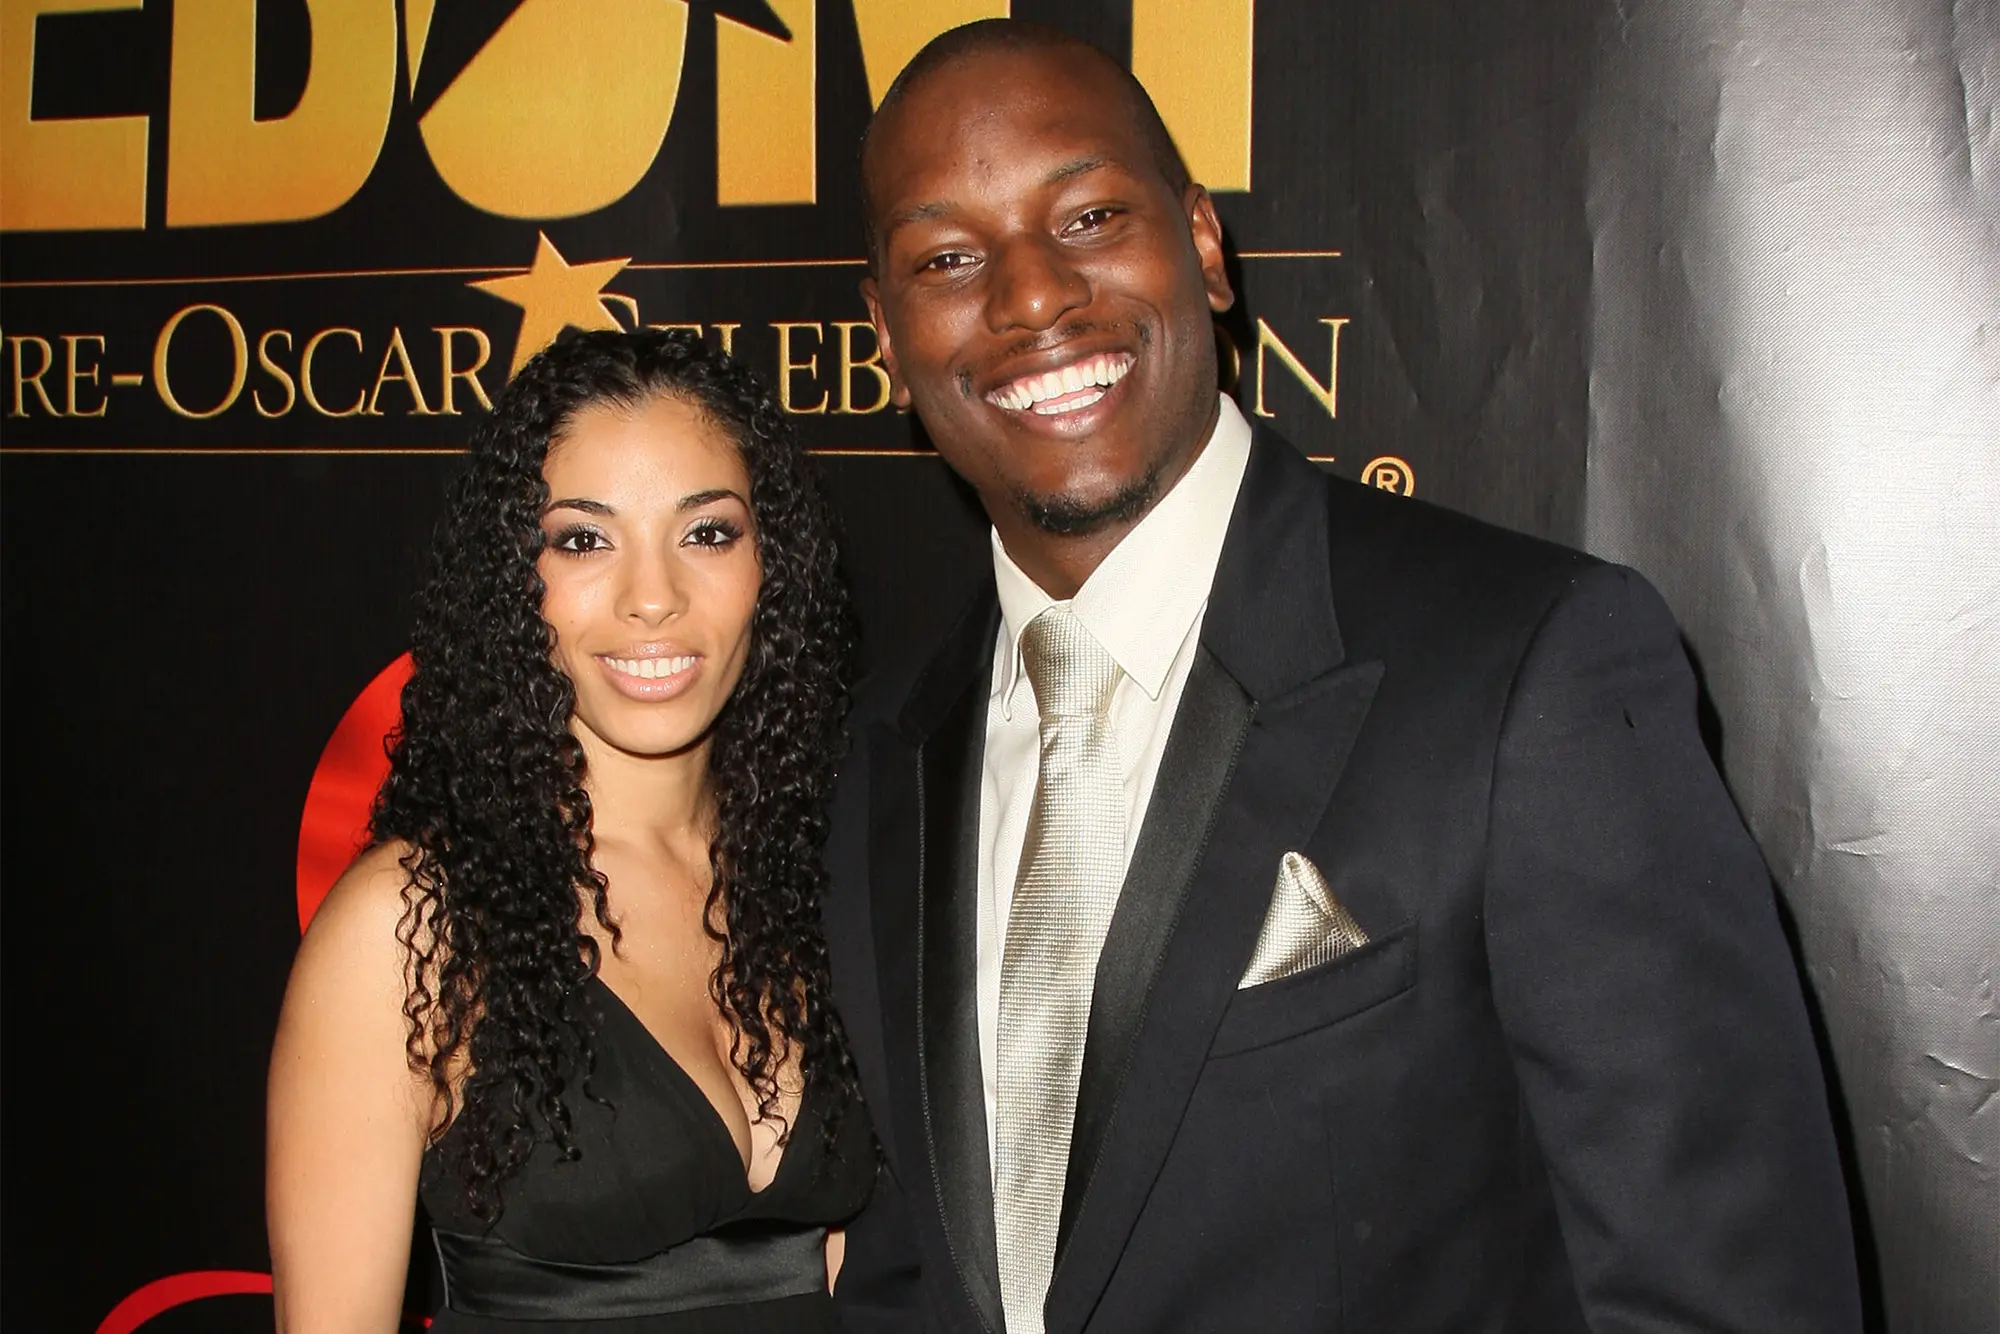 Norma Gibson: The Untold Story of Tyrese Gibson's First Wife